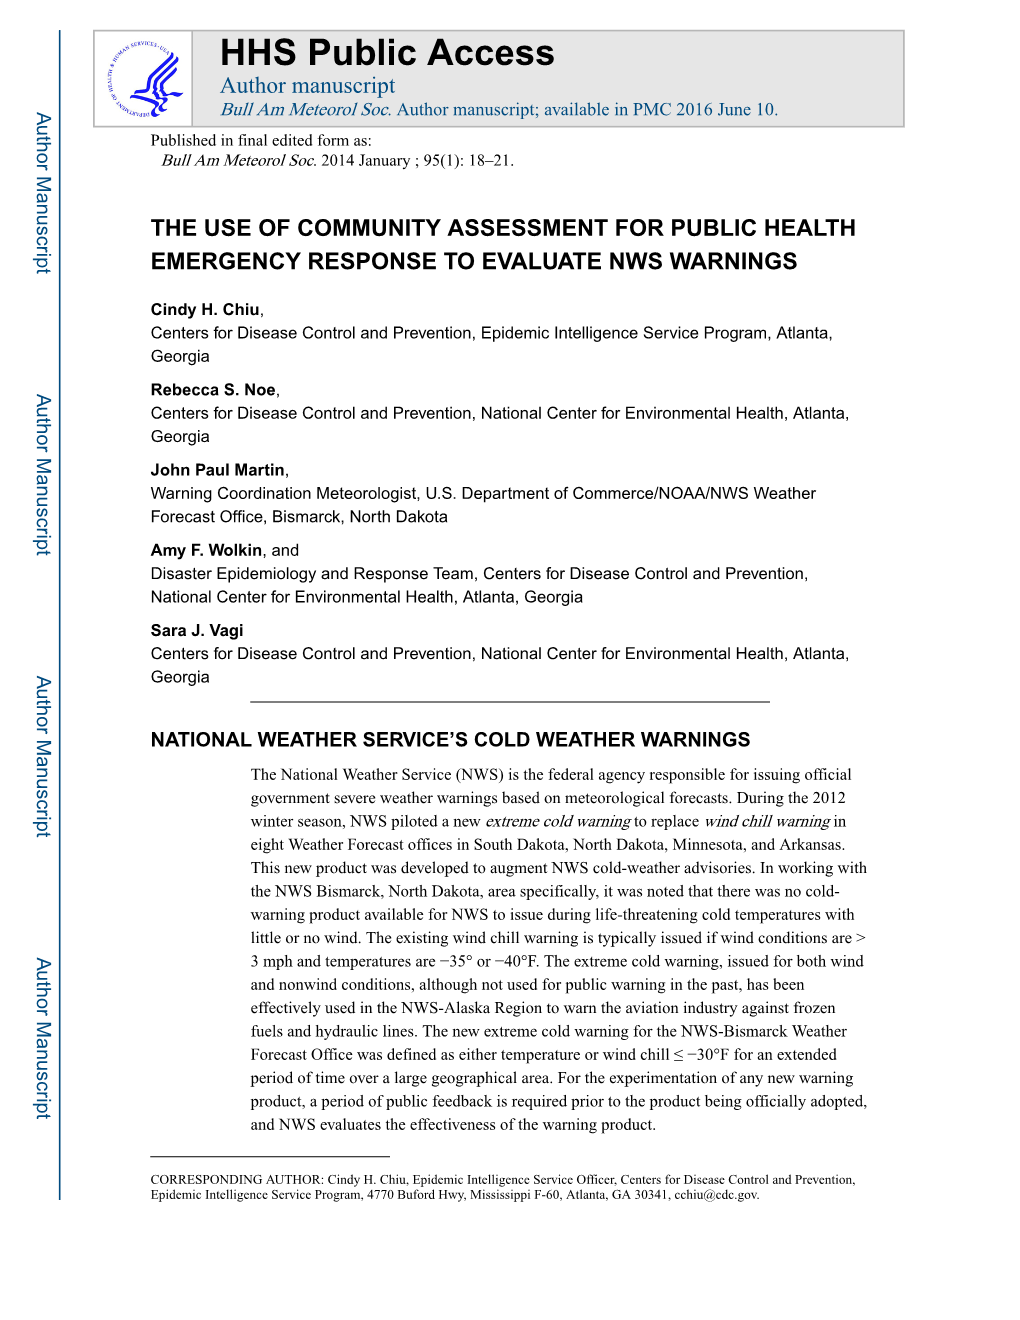 The Use of Community Assessment for Public Health Emergency Response to Evaluate Nws Warnings